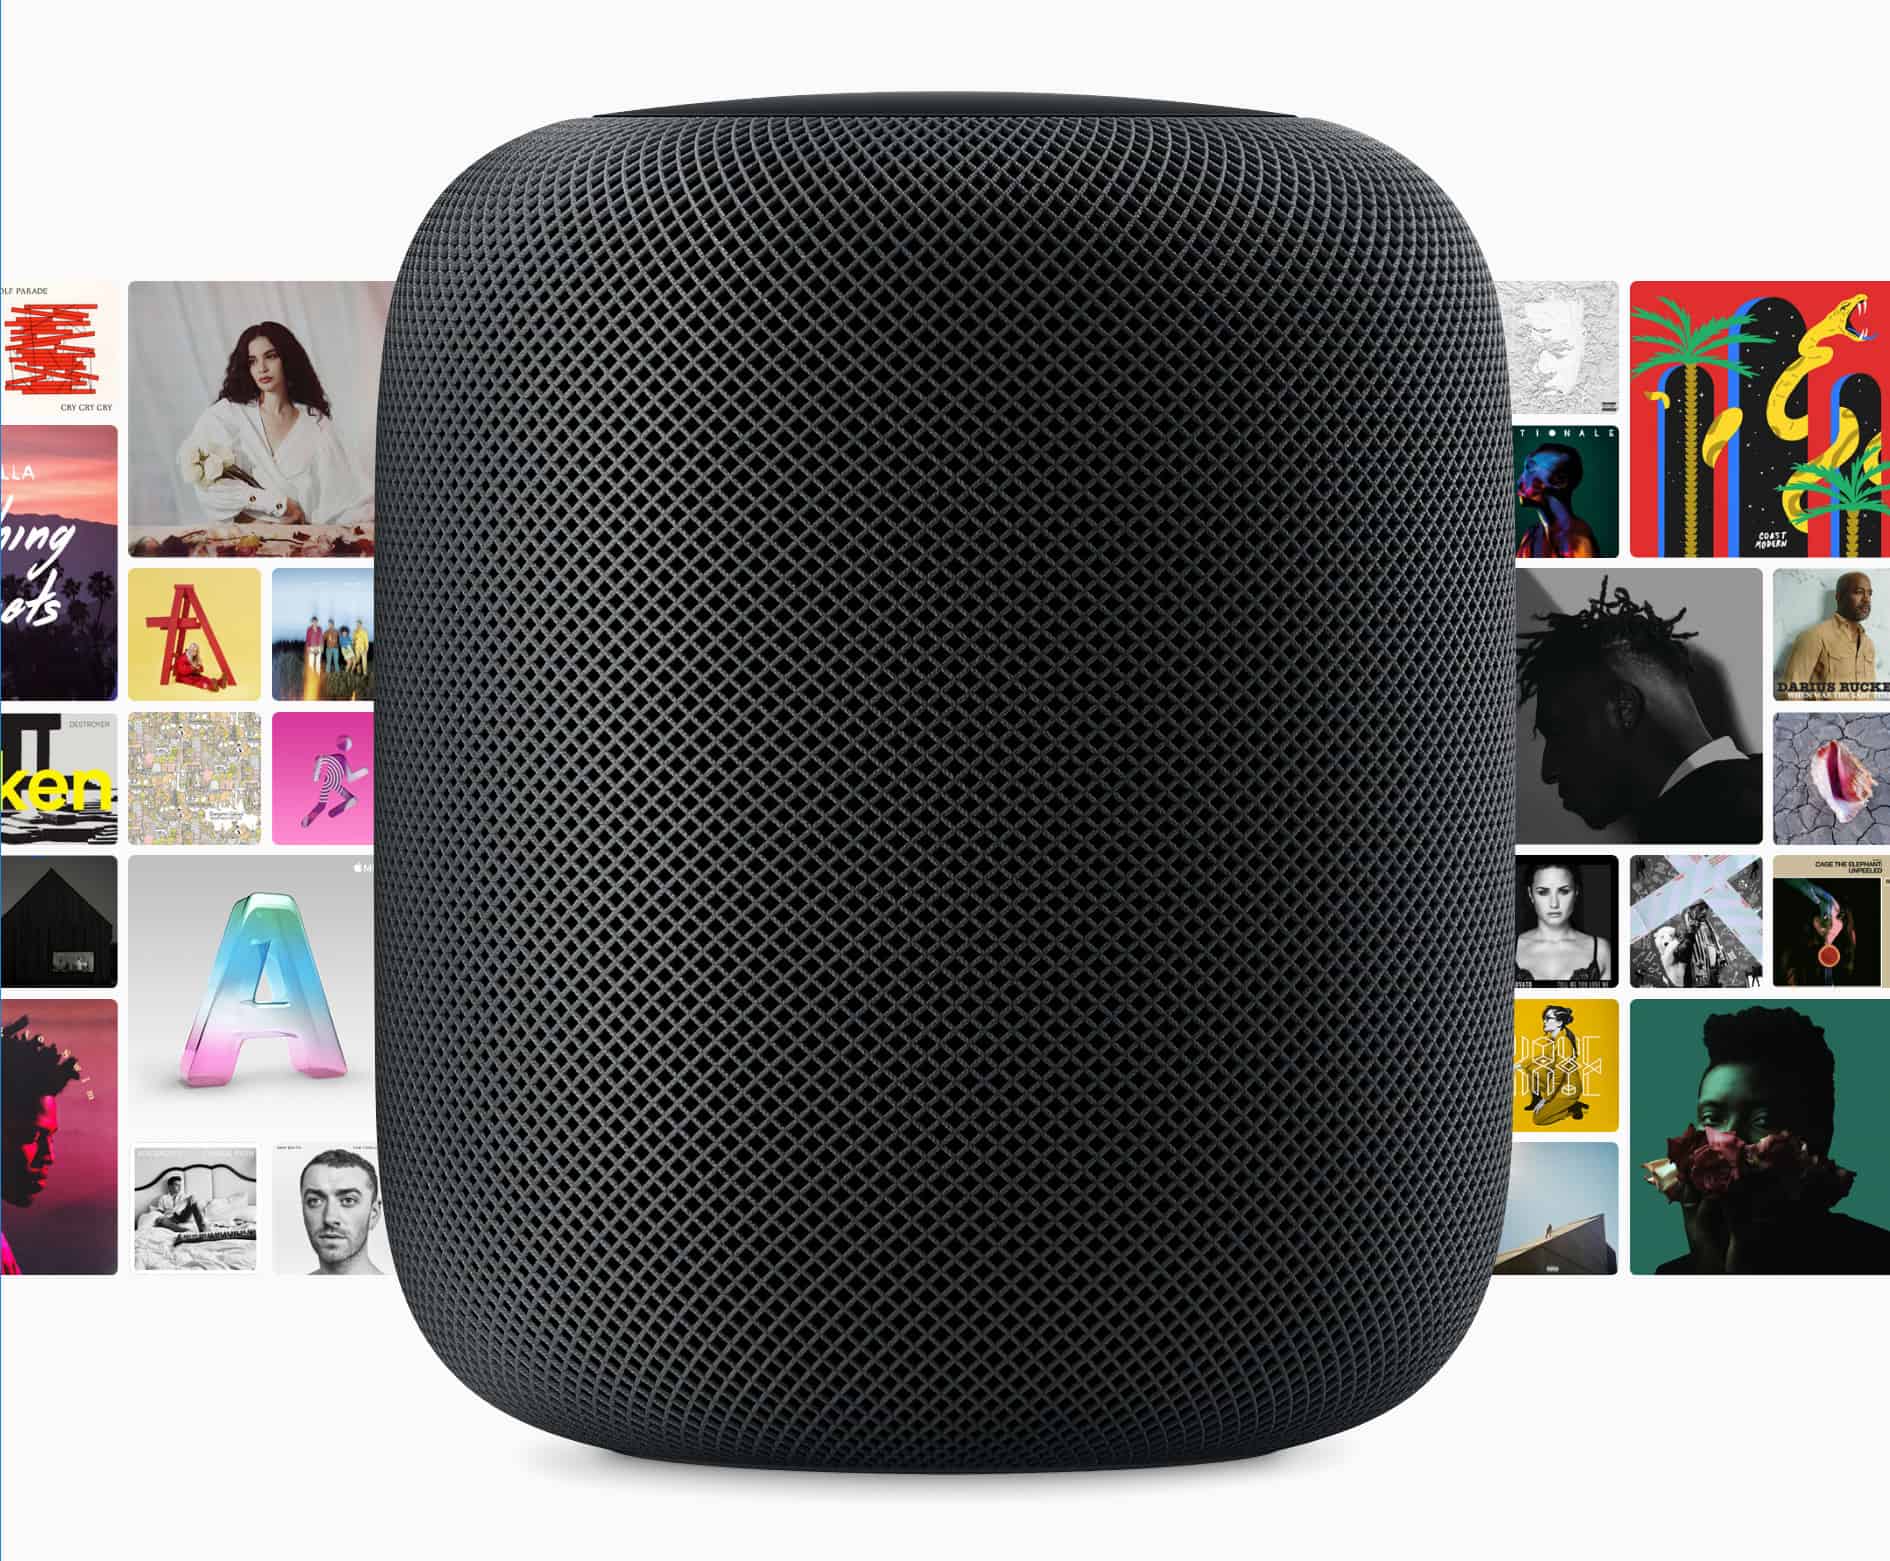 Play Spotify On Homepod From Mac